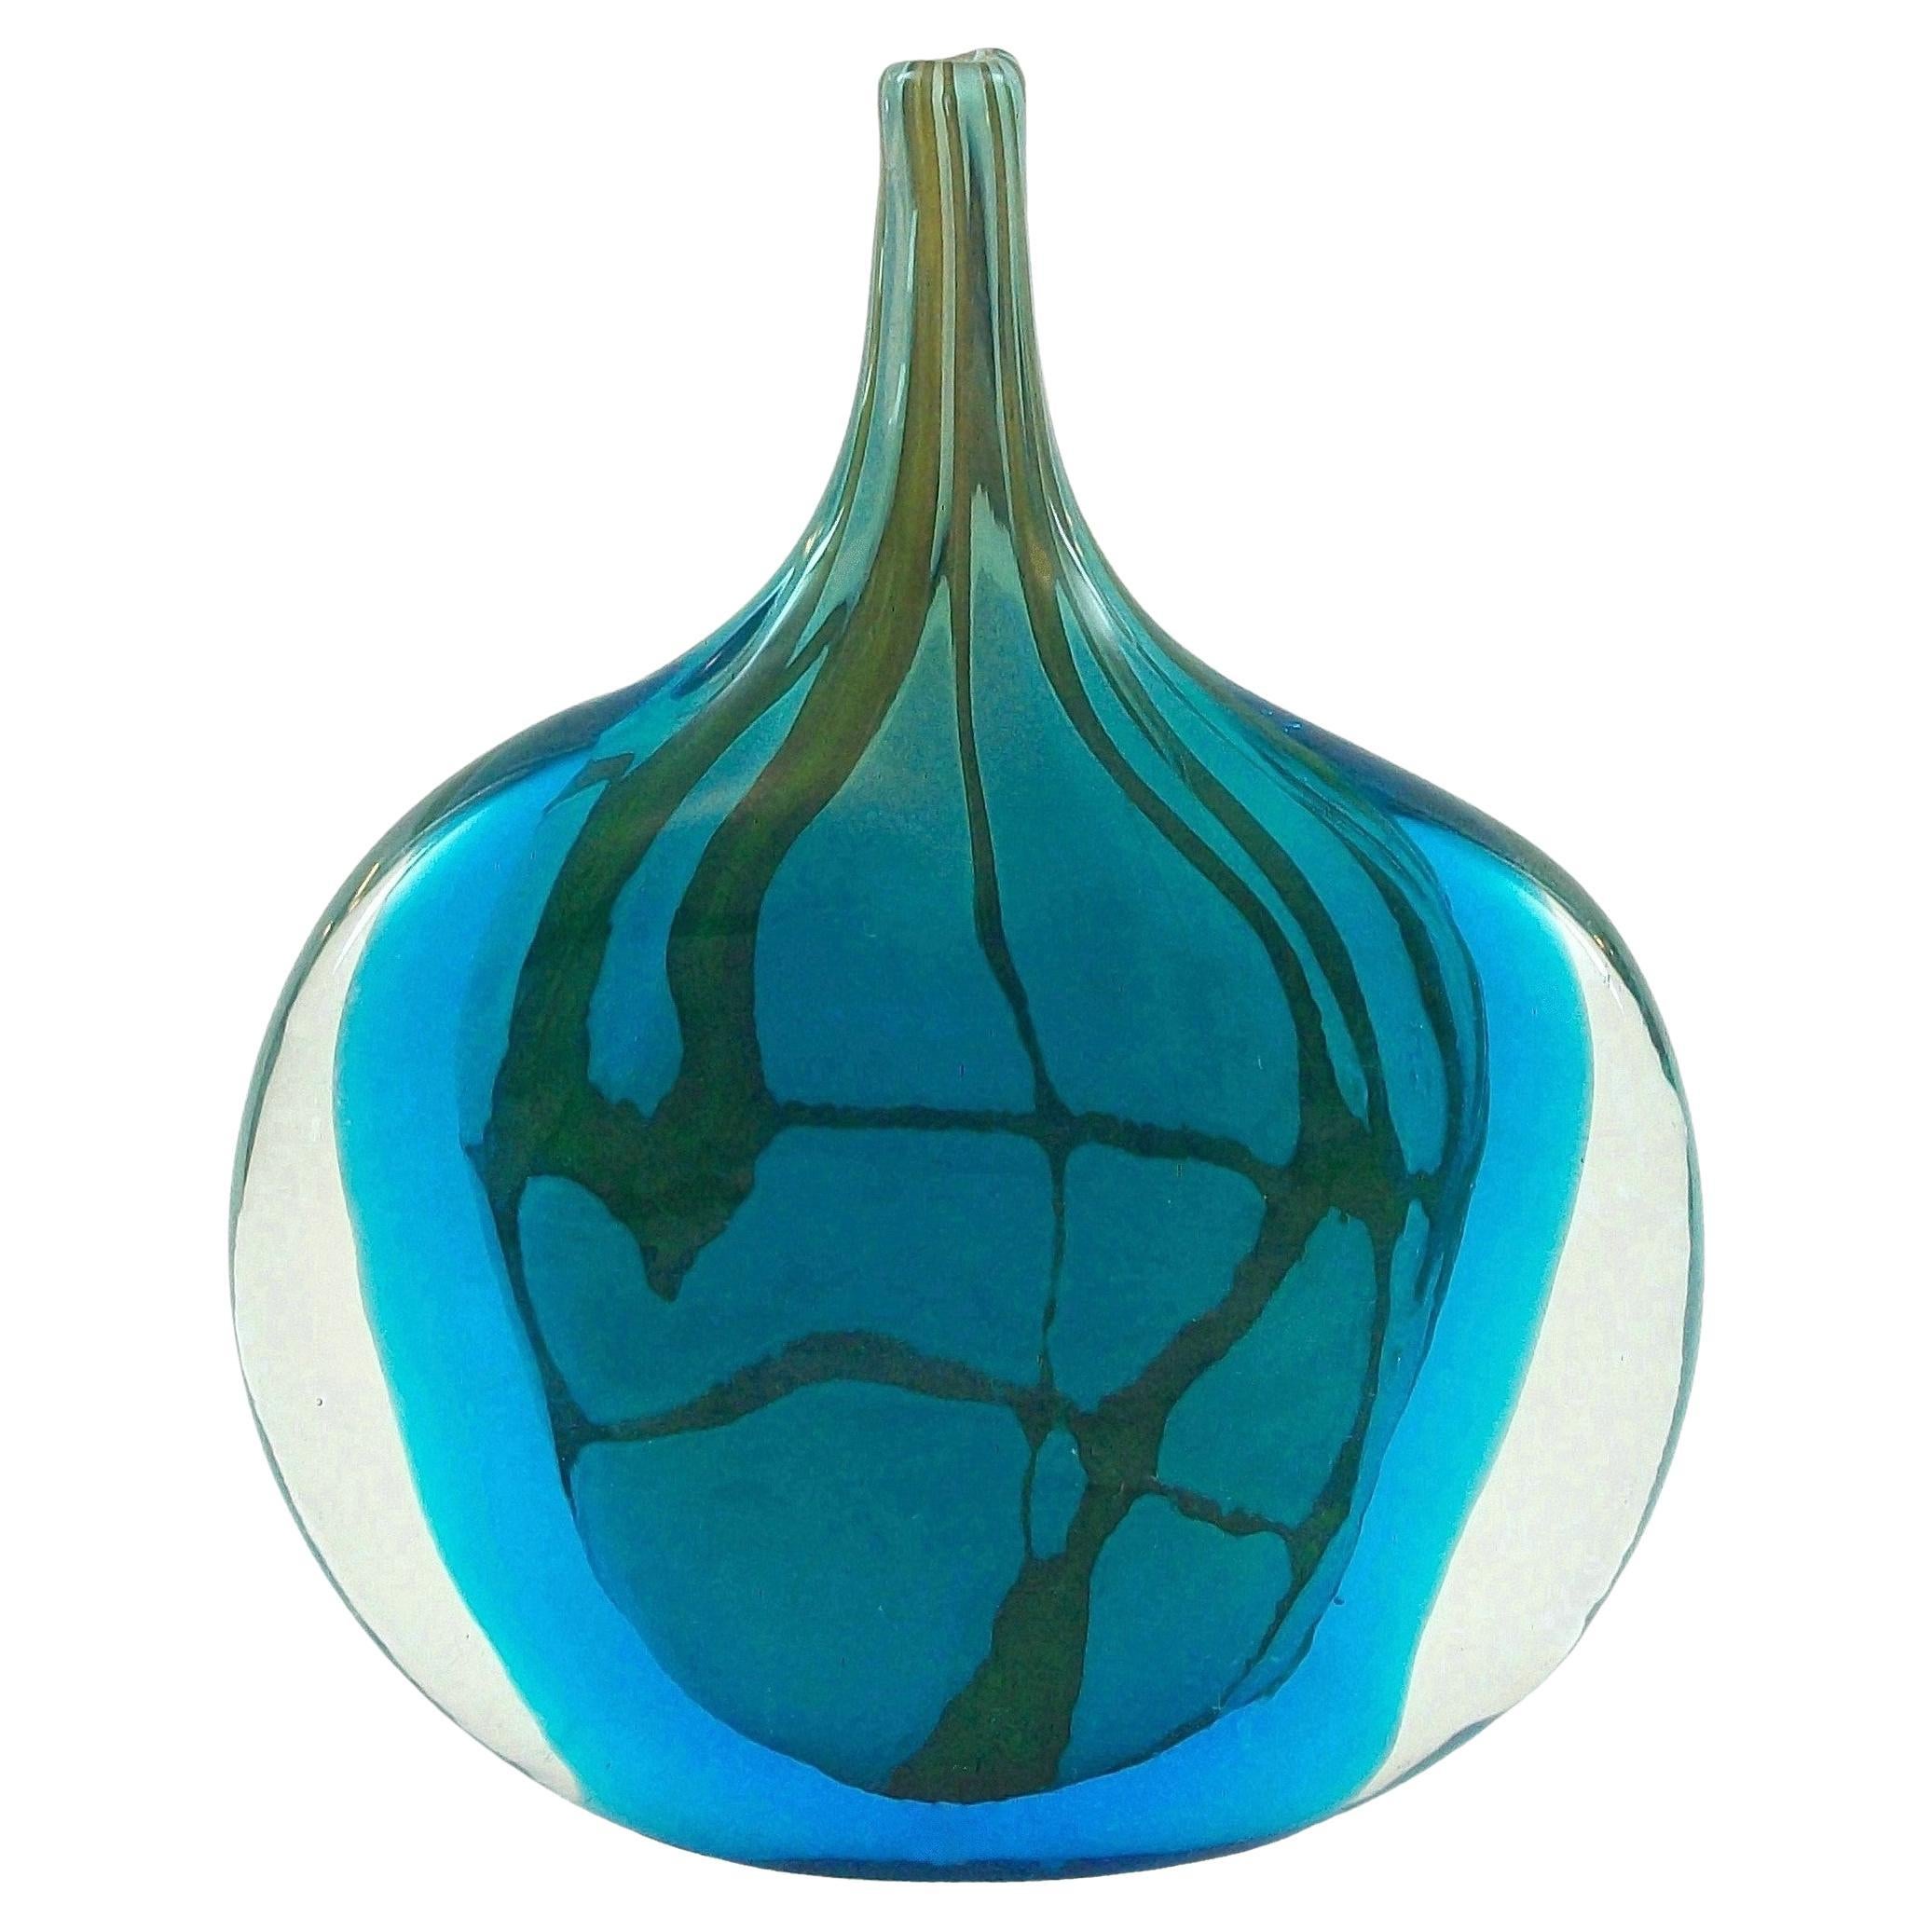 What is Maltese glass called?